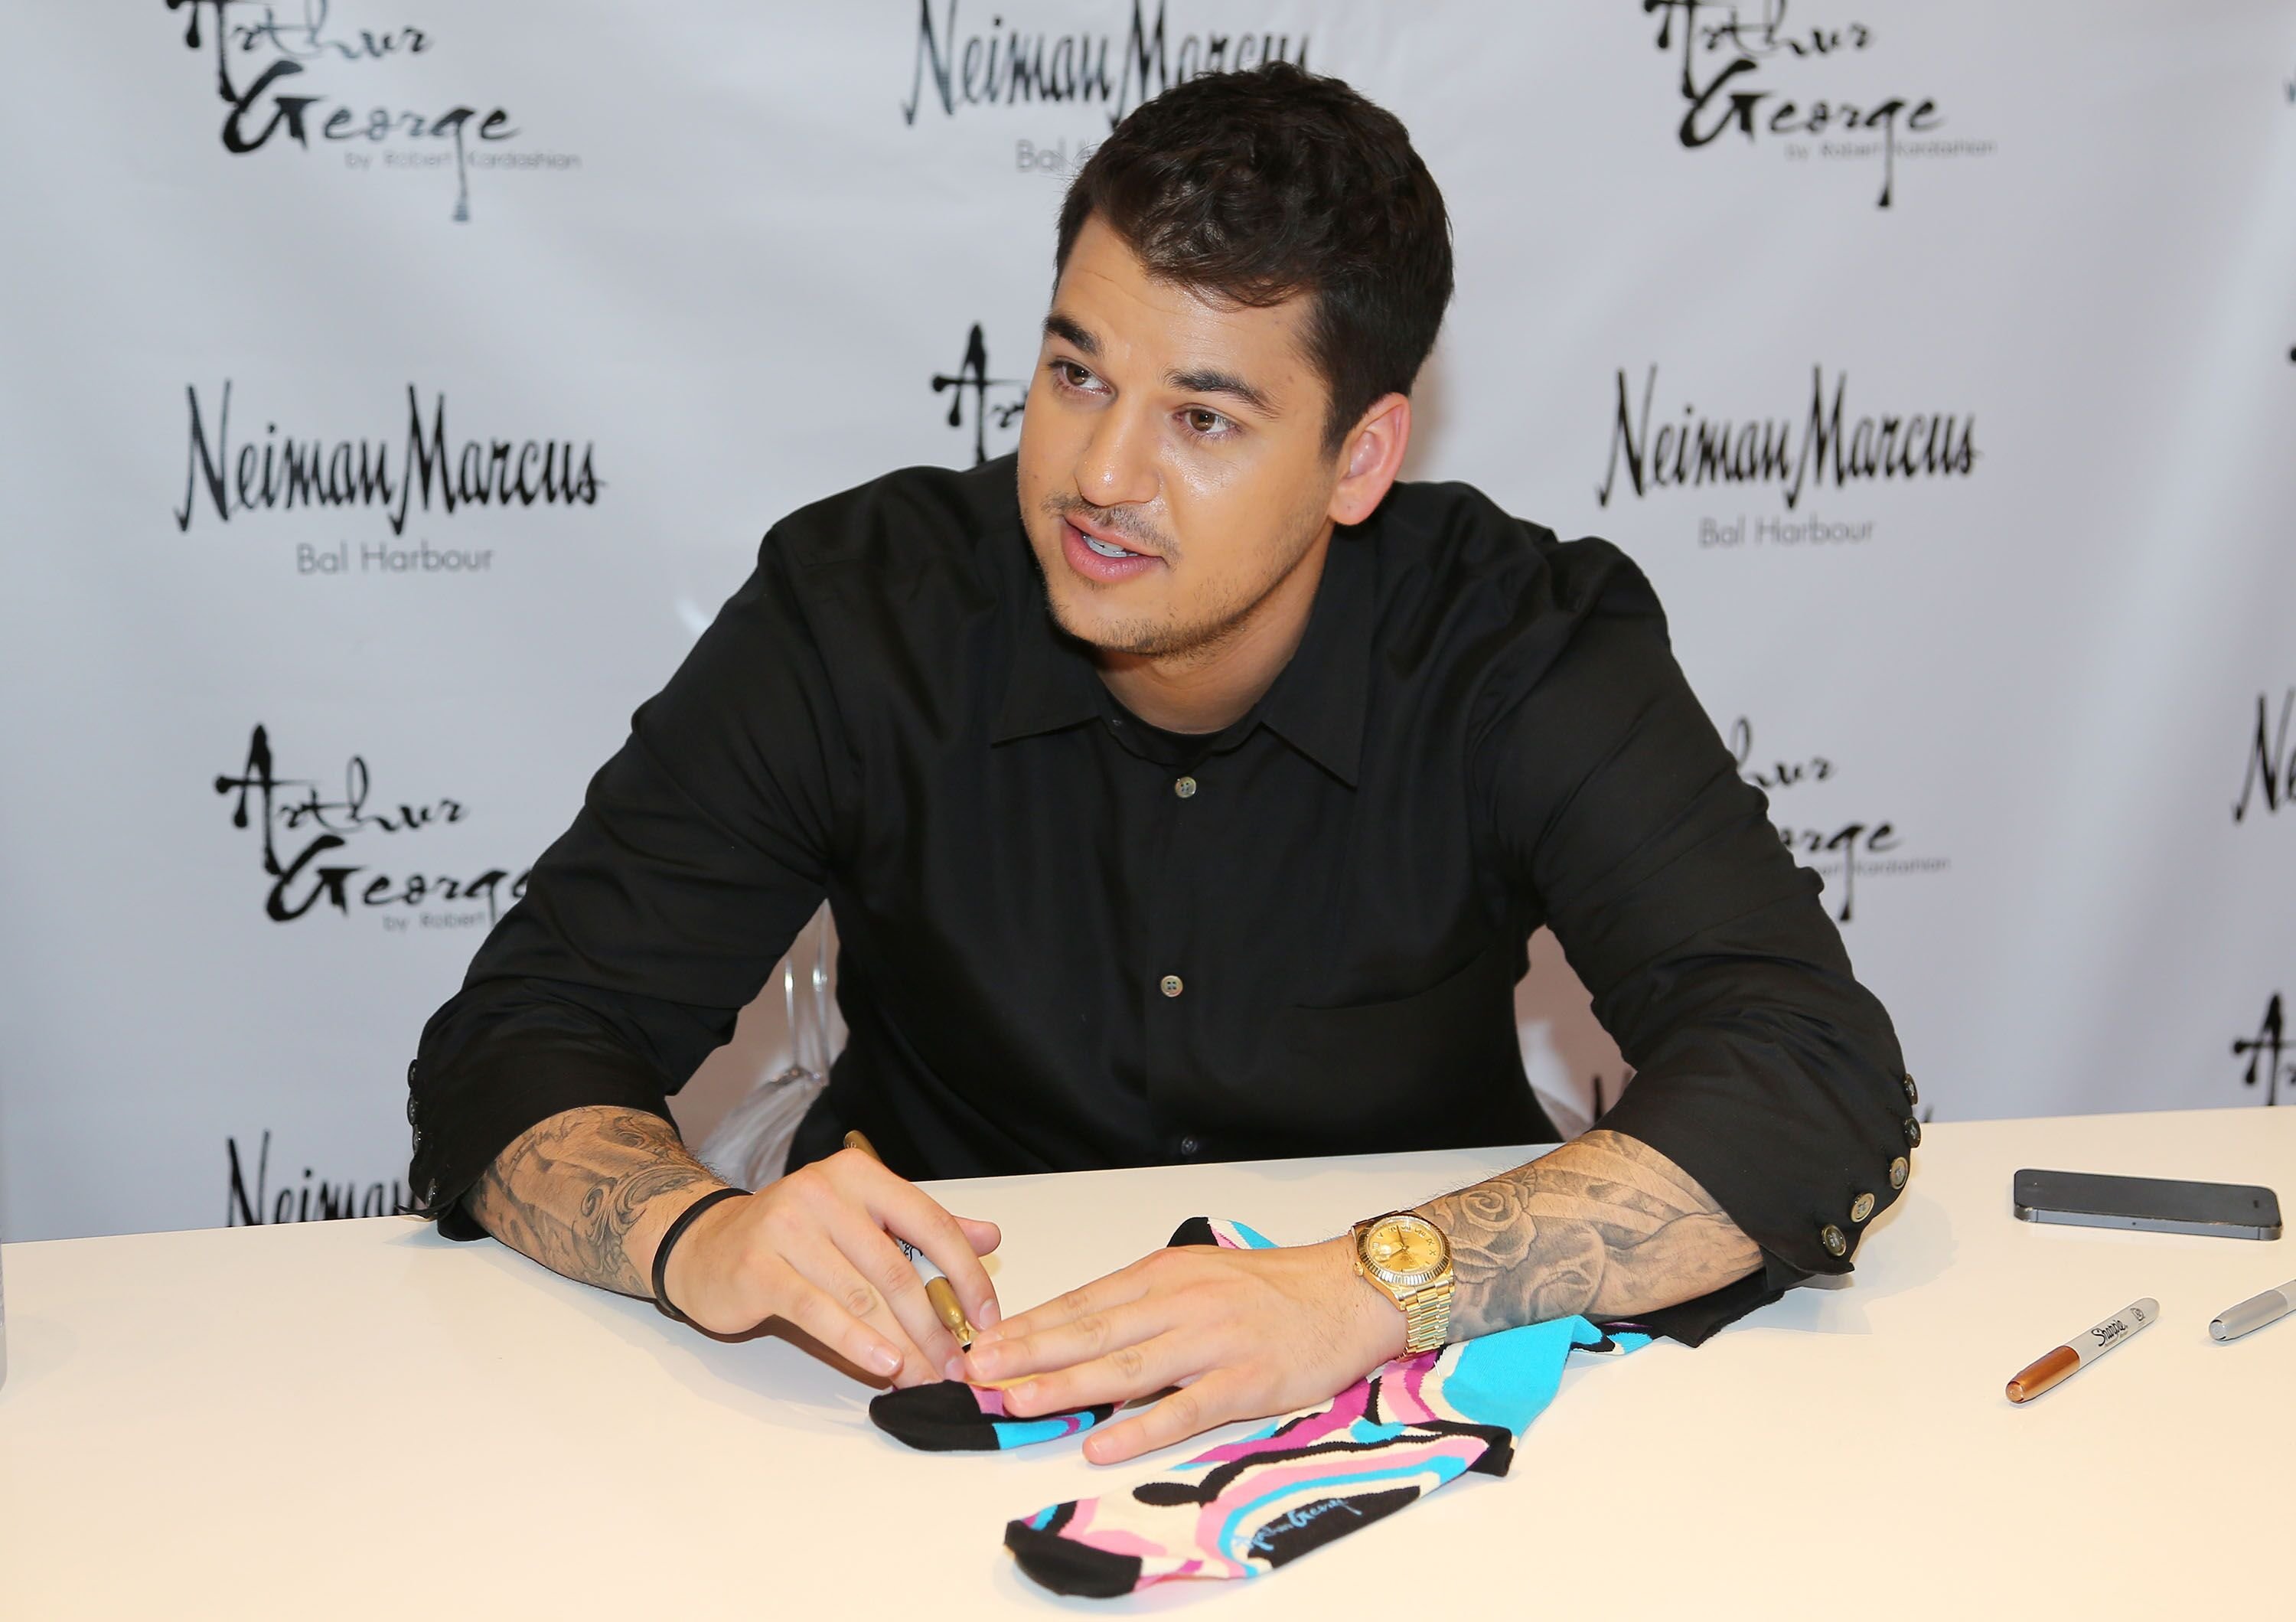 A portrait of Rob Kardashian at one of his Arthur George autograph signing events at Neiman Marcus | Source: Getty Images/GlobalImagesUkraine